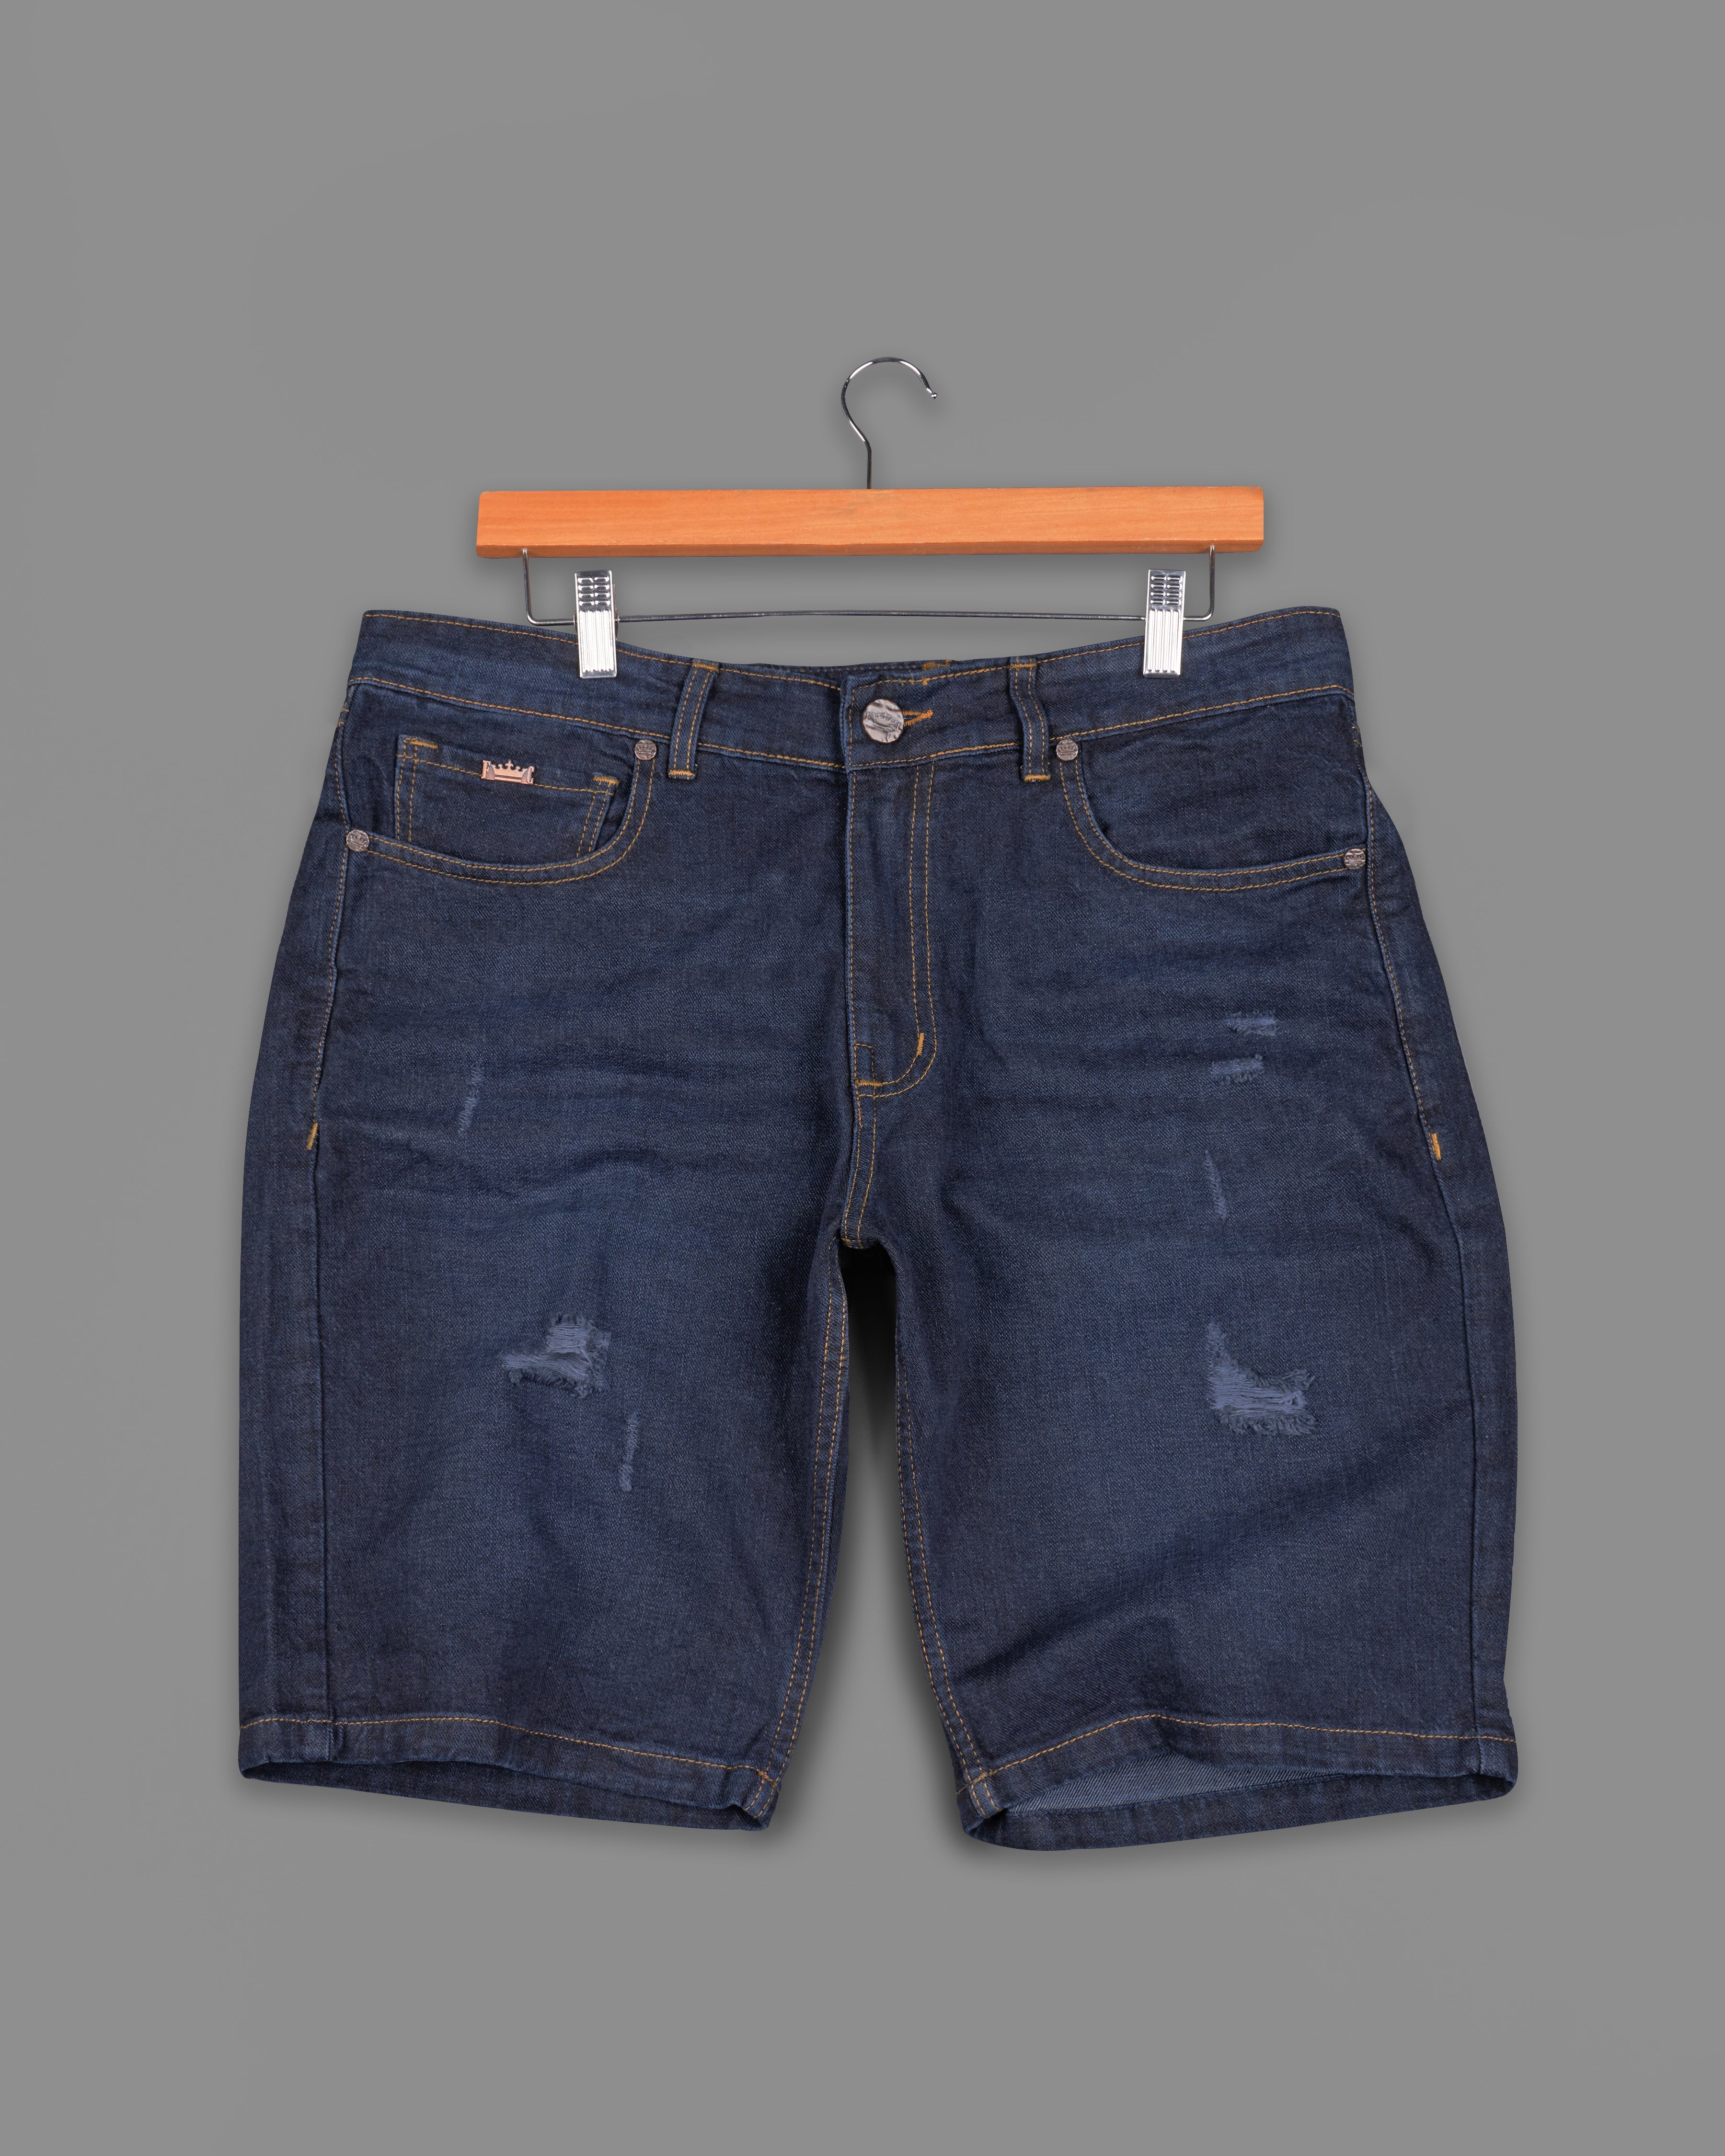 Martinique Blue Mildly Distressed Whiskering Wash Denim Shorts SR219-28, SR219-30, SR219-32, SR219-34, SR219-36, SR219-38, SR219-40, SR219-42, SR219-44